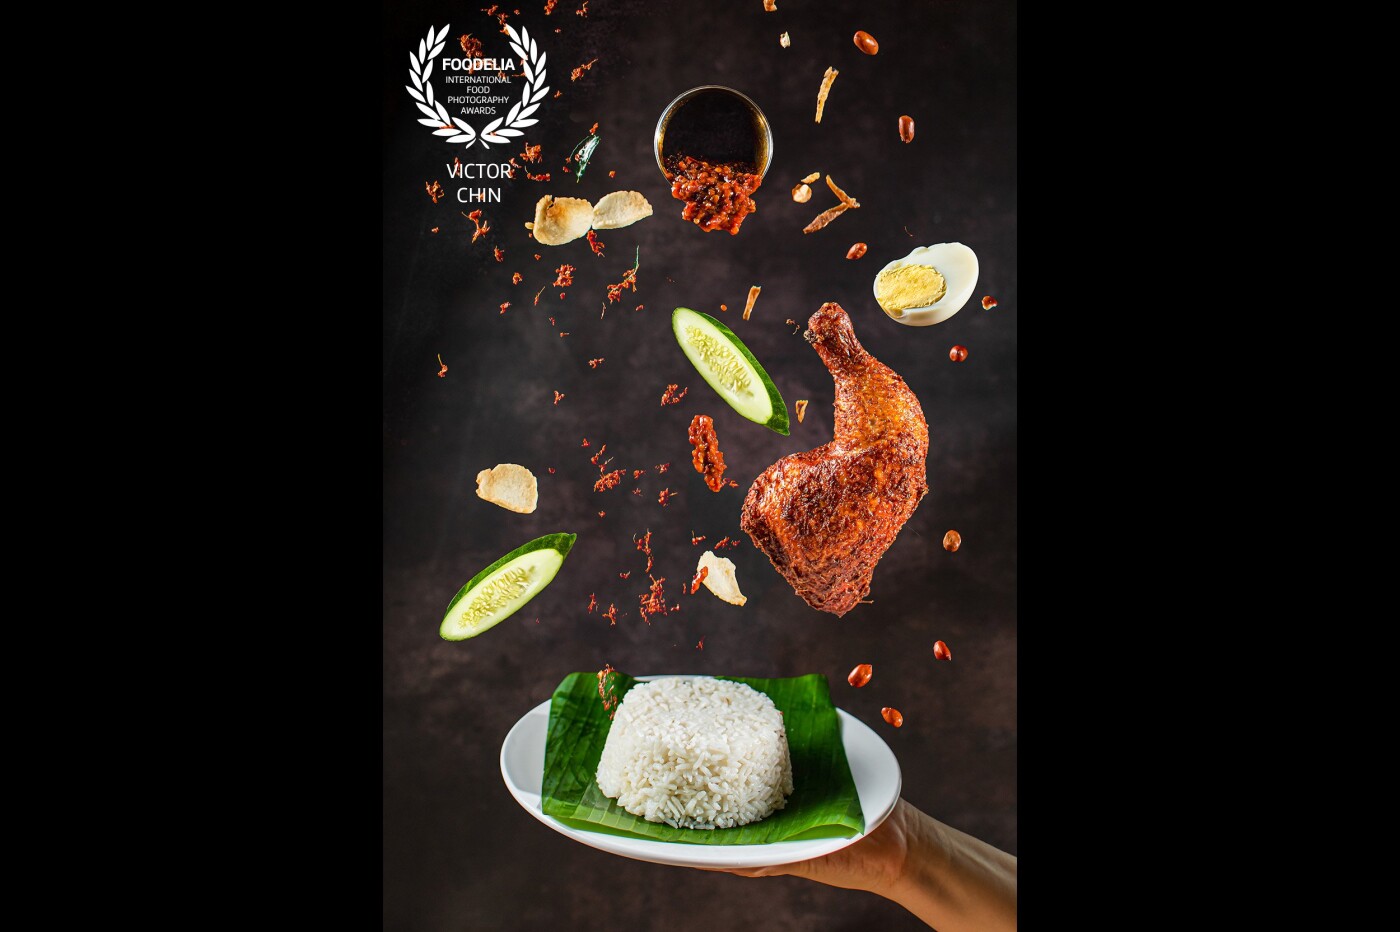 Nasi Lemak! This is Malaysia’s most flavored signature dish and the most sinful big breakfast for all Malaysian. The aim of this picture is to surface all the flavors and ingredients of the Nasi Lemak and to be printed on the front page of the restaurant menu. 